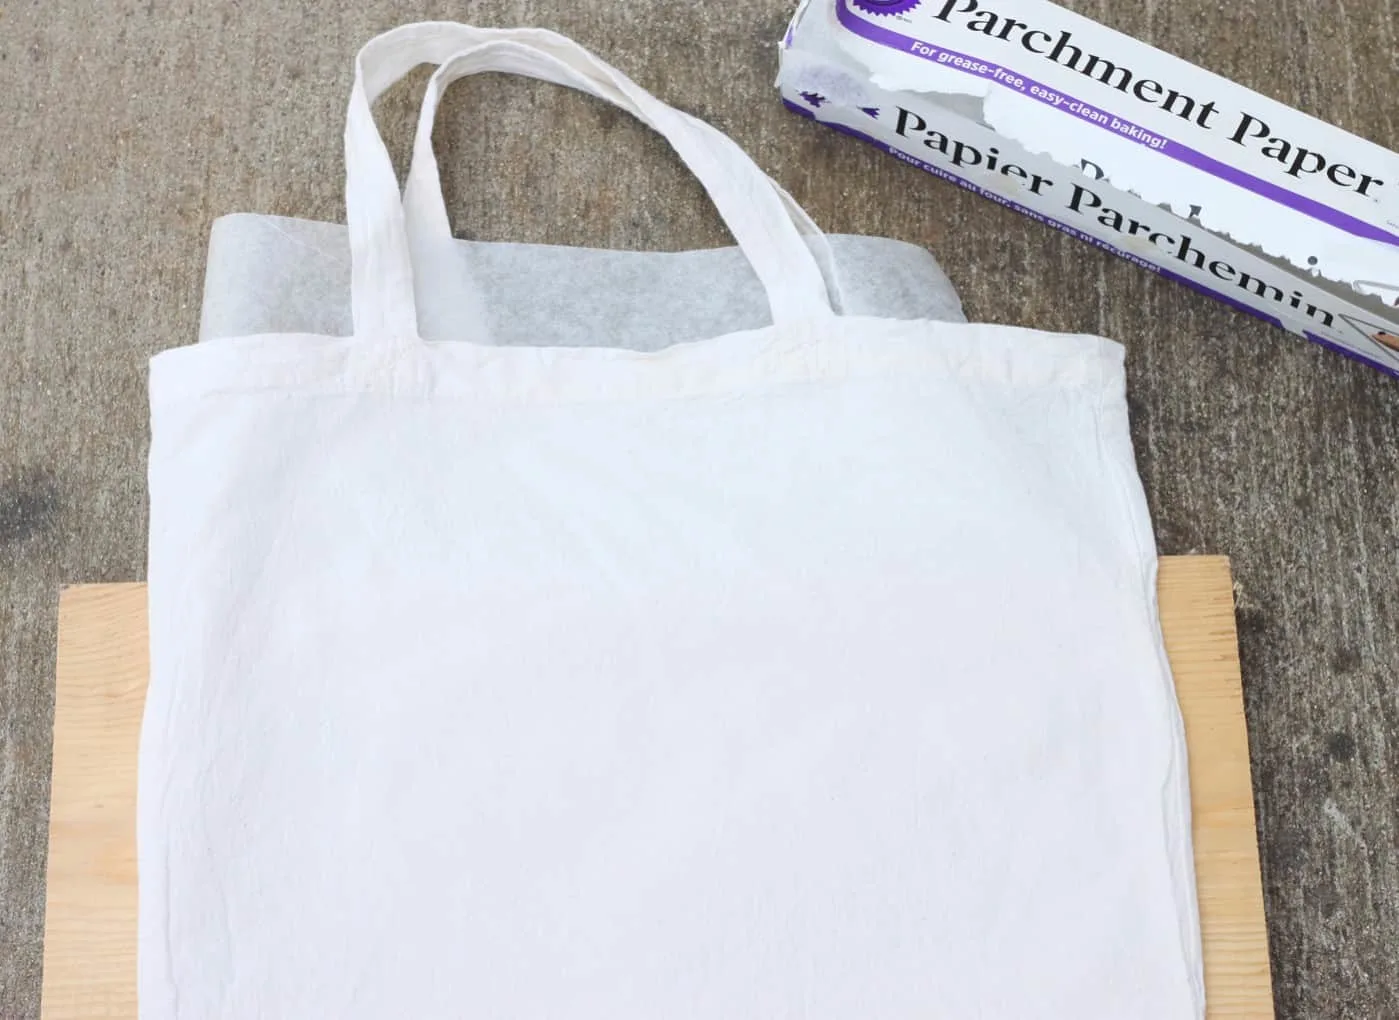 Place a piece of wax paper between two layers of a tote